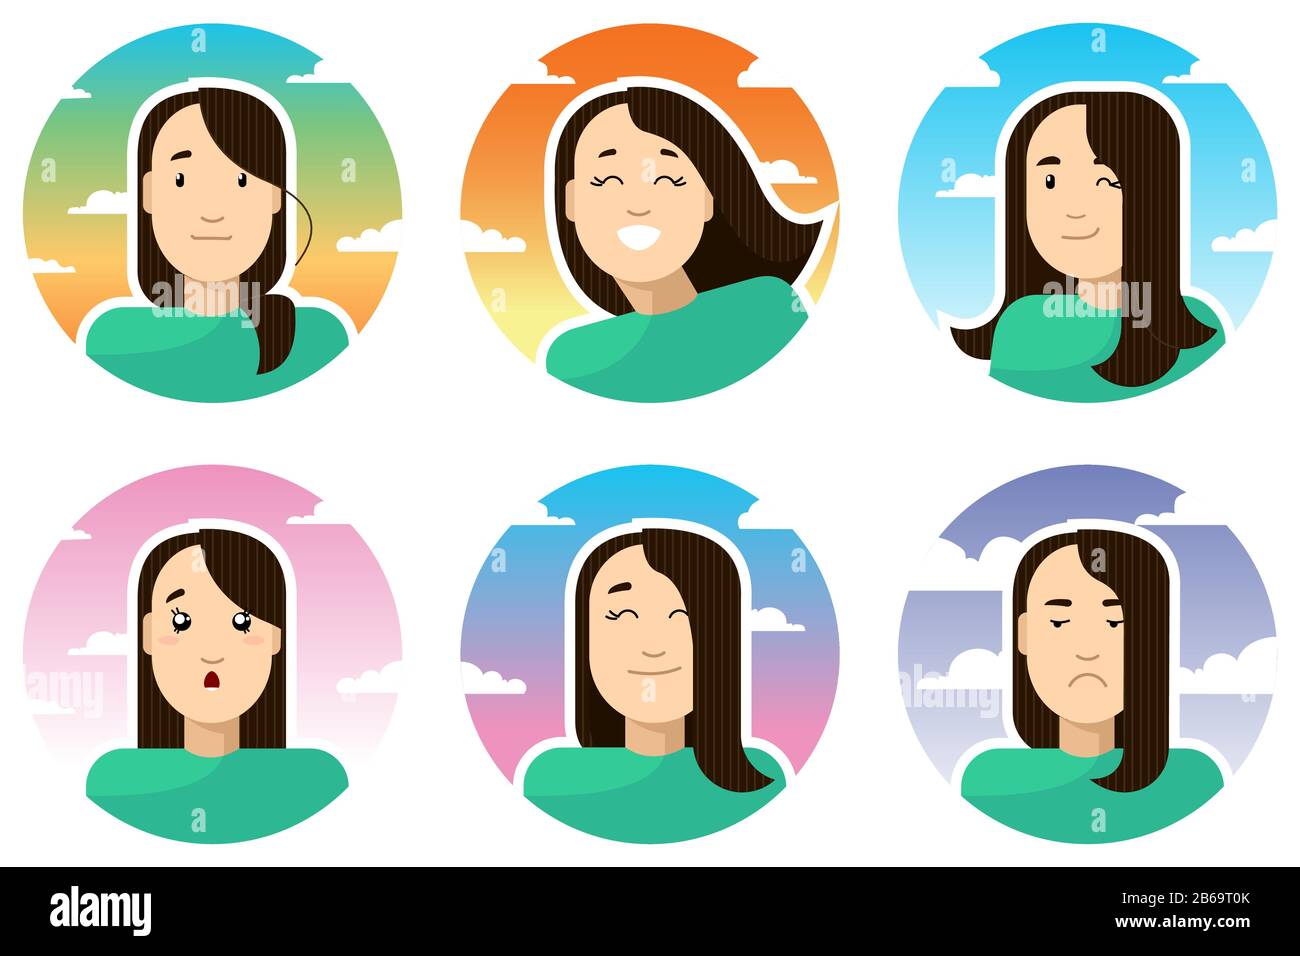 set of icons with girls with different emotions; happy, satisfied, winking, dissatisfied, surprised; round icons on the background of sky and clouds. Stock Vector